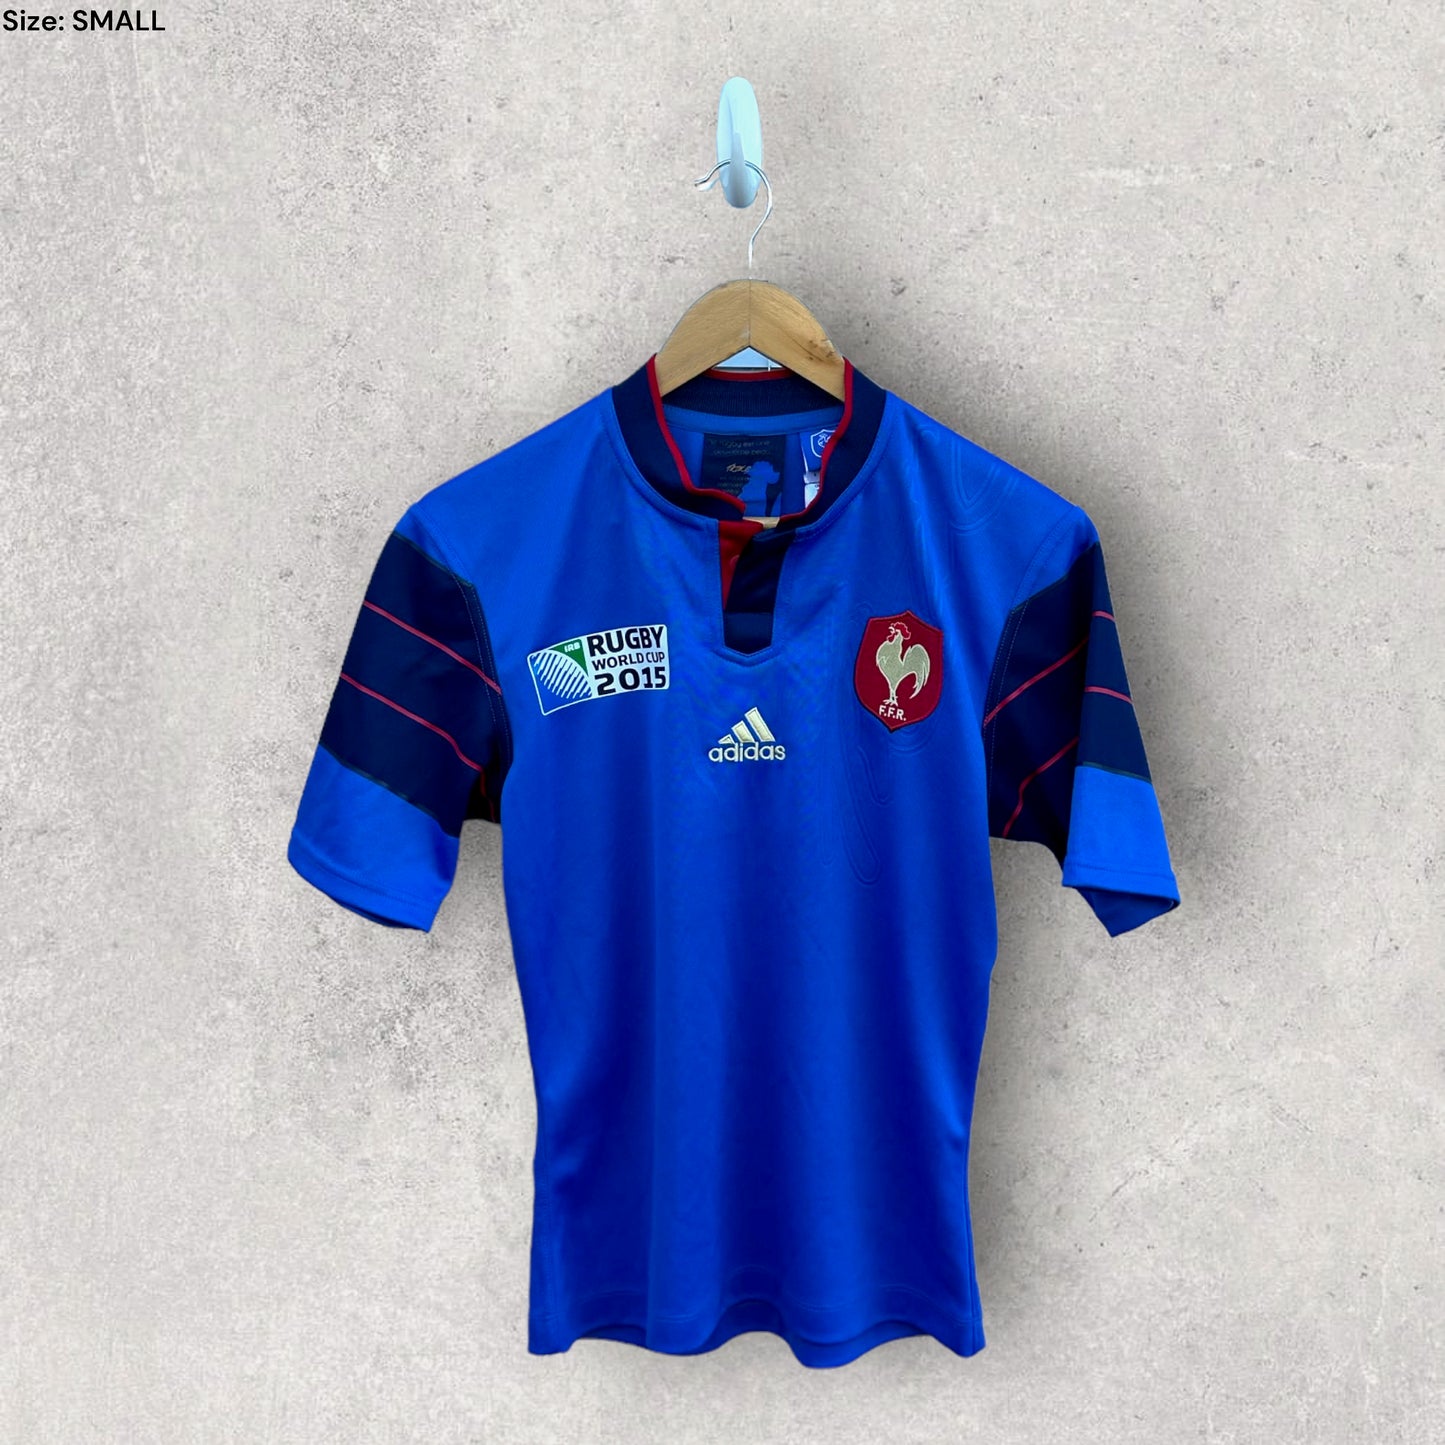 FRANCE 2015 RUGBY WORLD CUP JERSEY